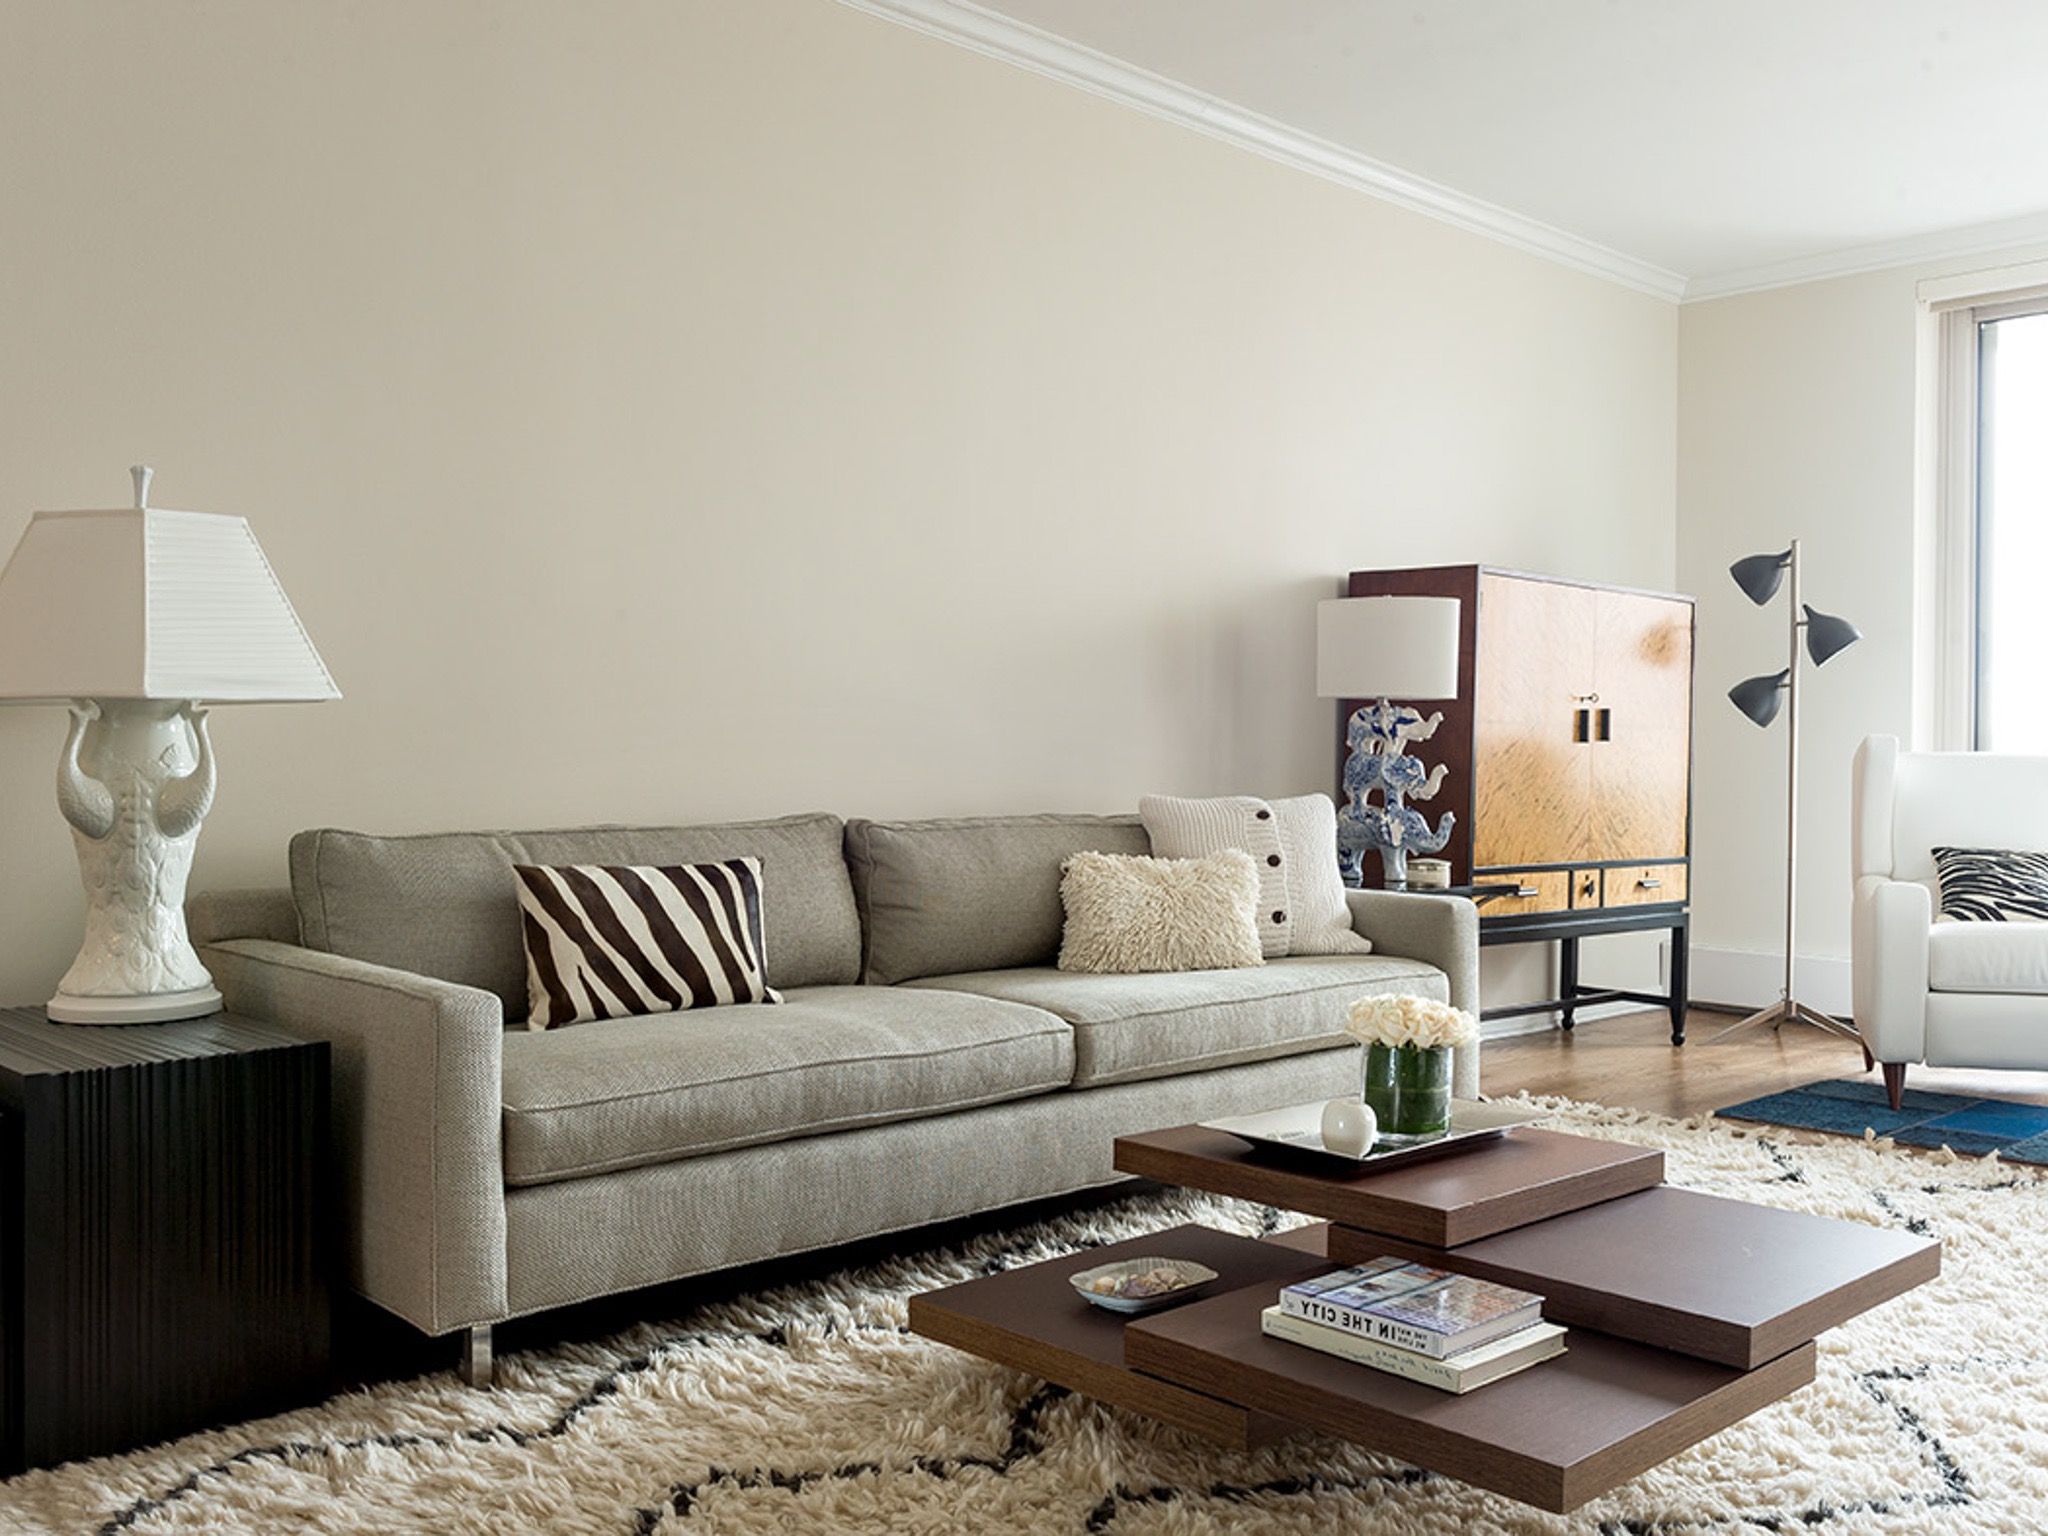 Cozy Living Room With Shag Area Rug And Geometric Coffee Table (View 15 of 27)